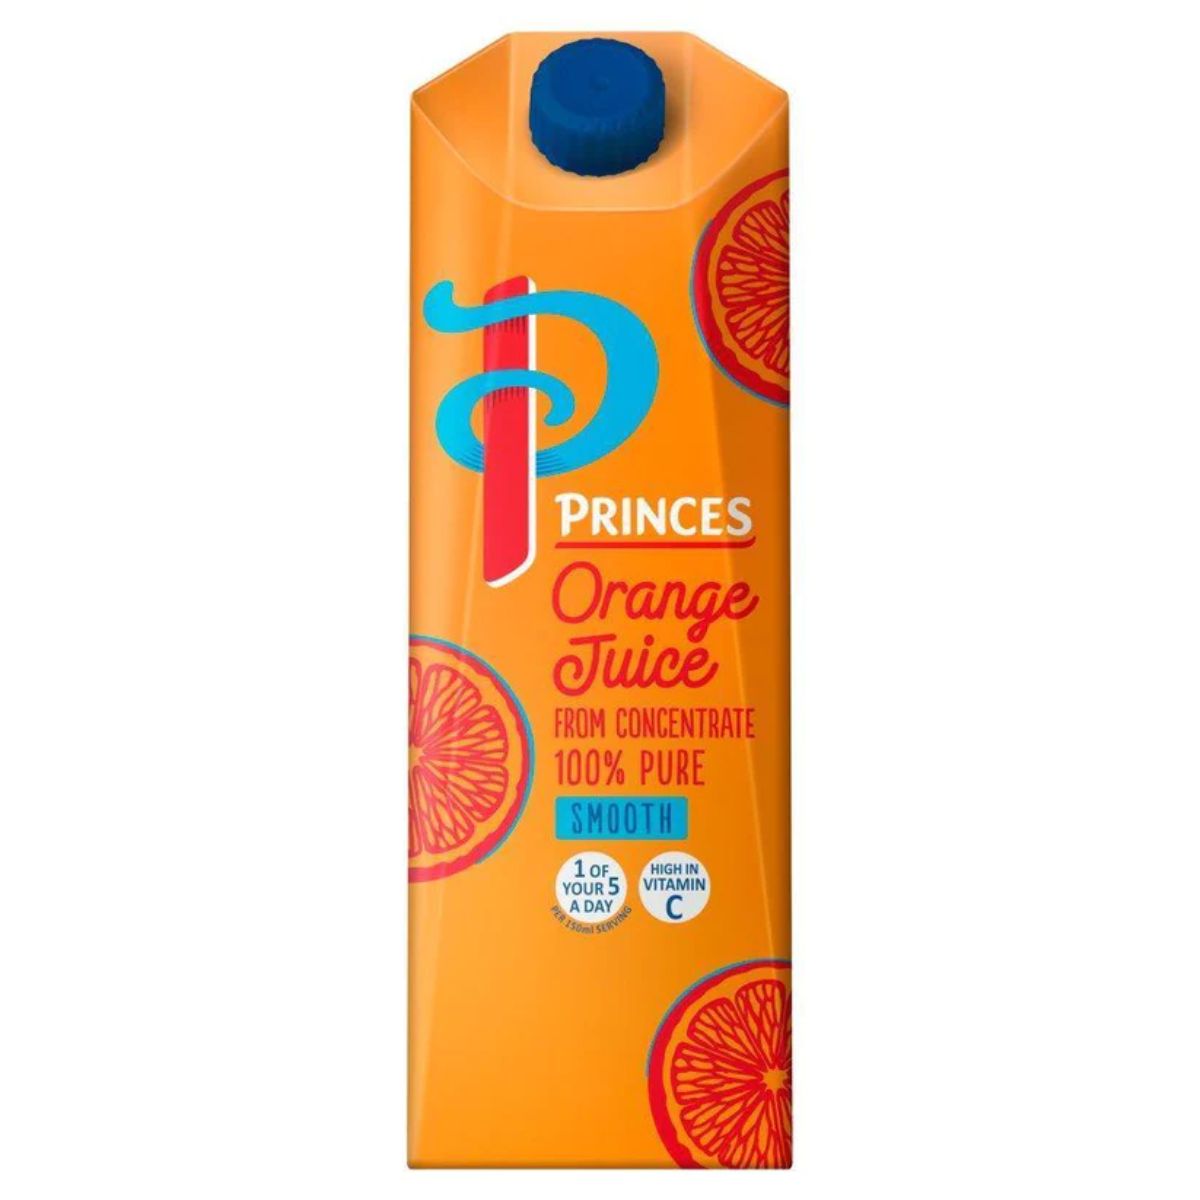 A bottle of Princes - Smooth Orange Juice from Concentrate - 1L on a white background.